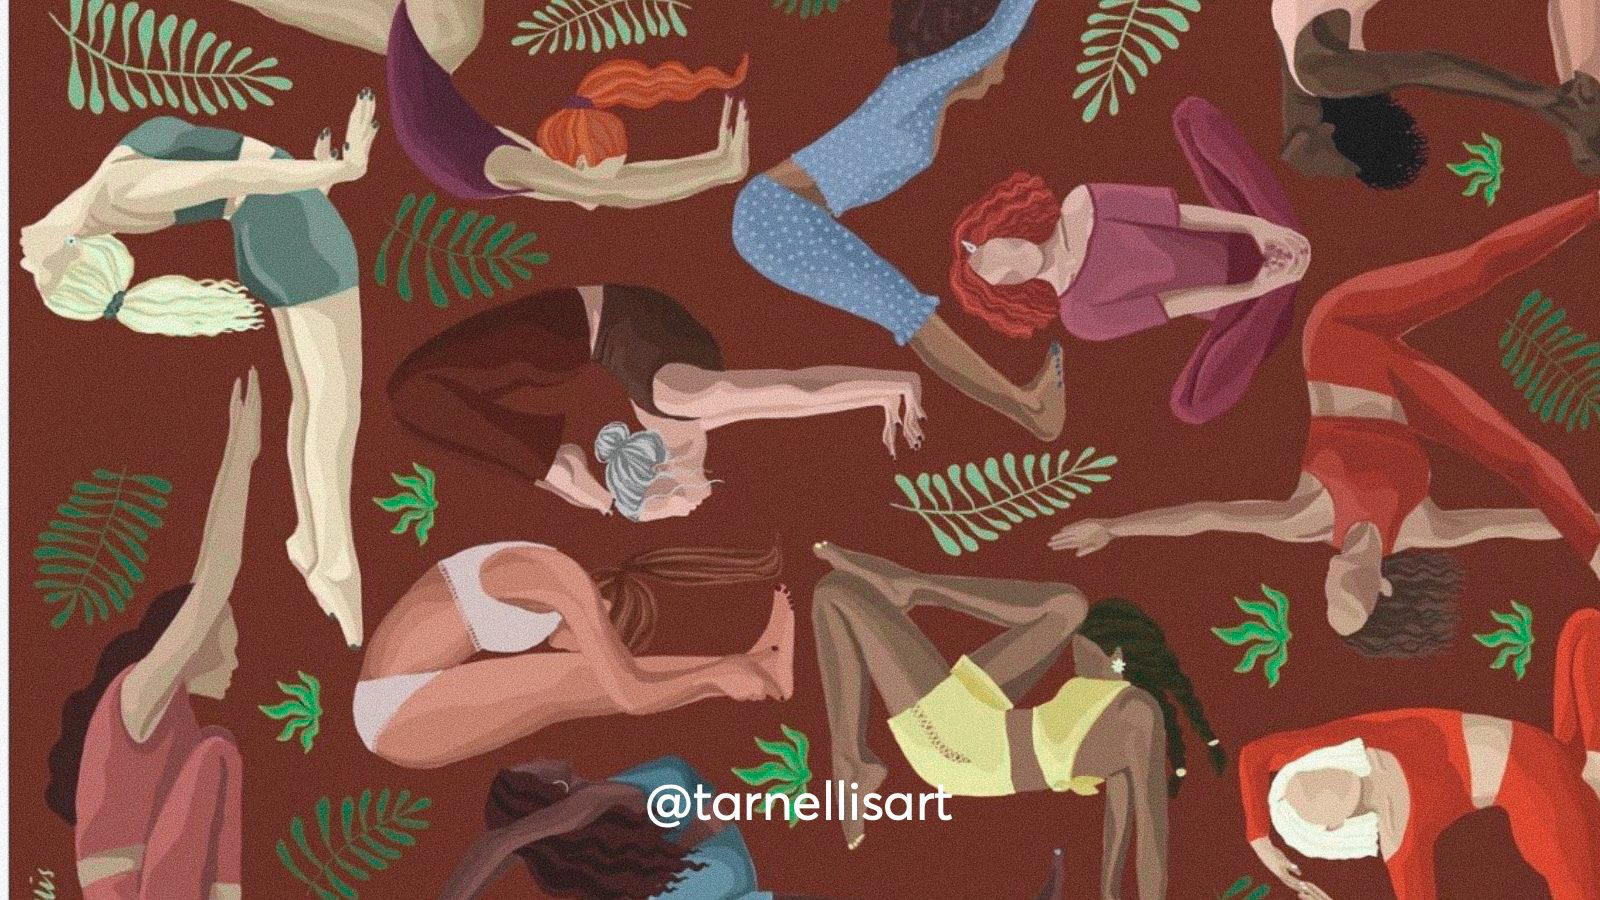 An illustration of many women doing yoga poses and stretching to take care of themselves